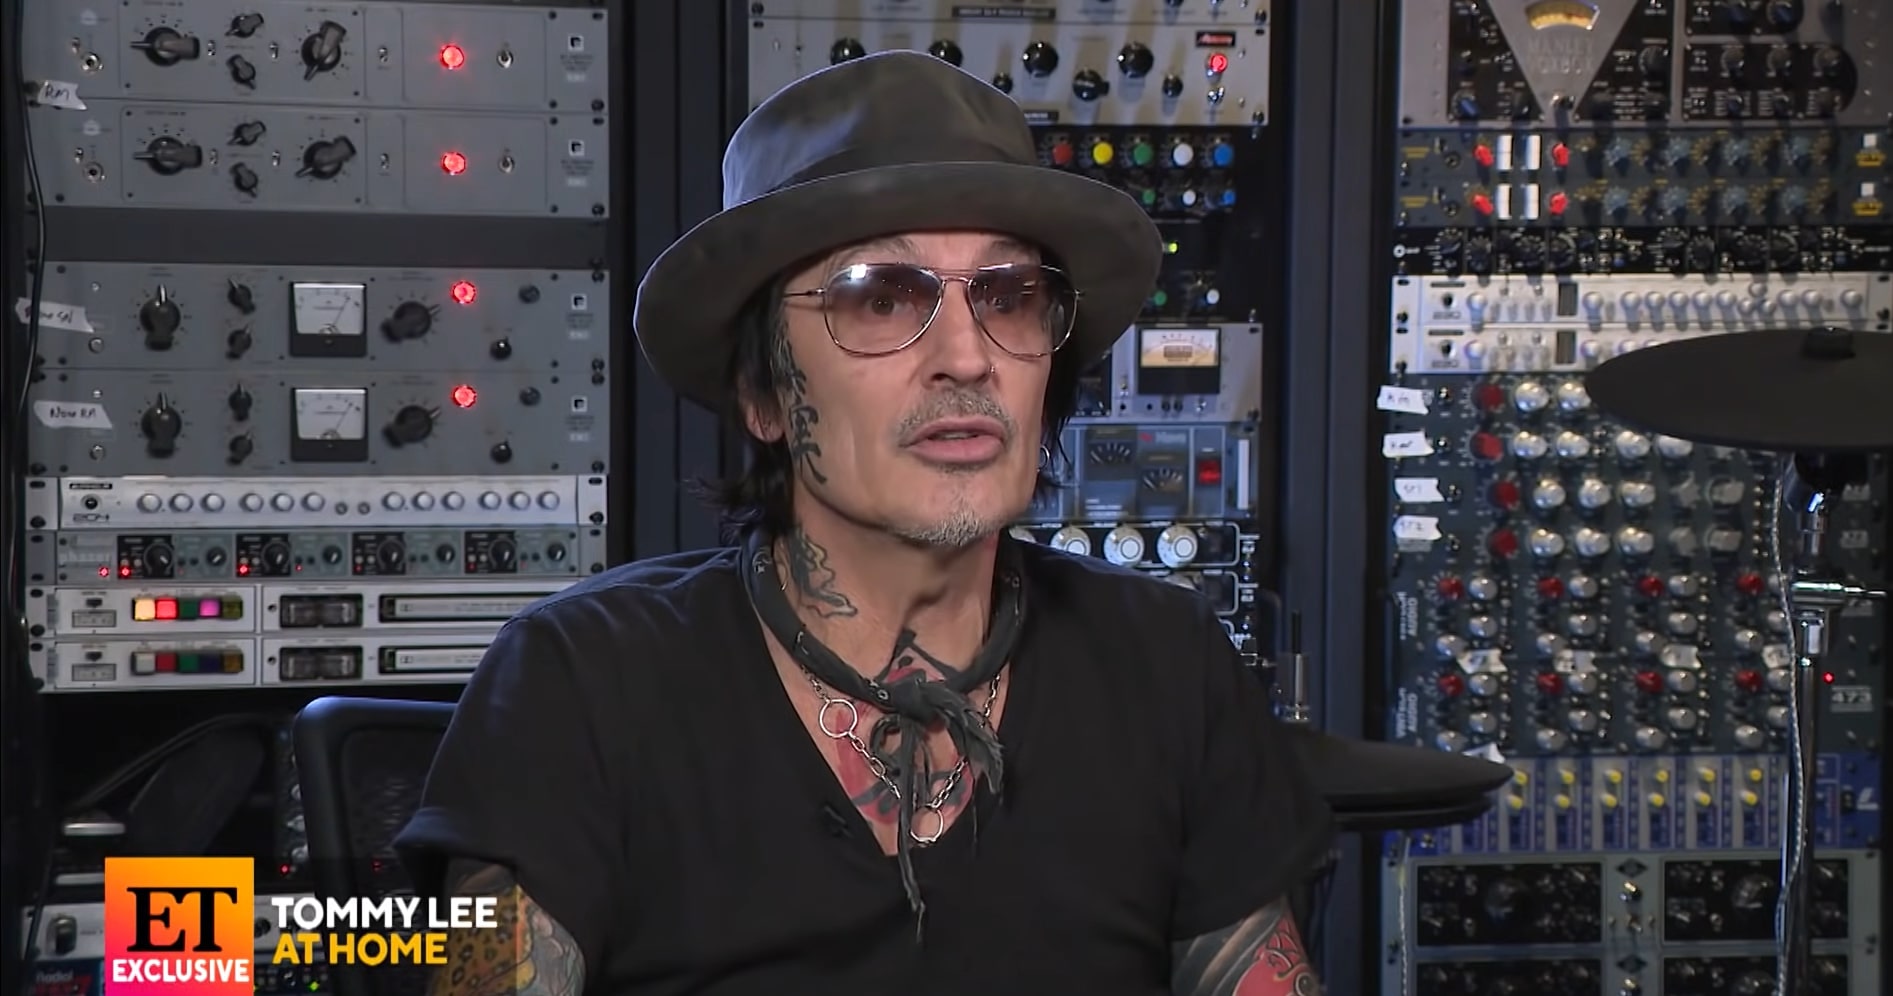 What is Tommy Lee’s Net Worth?